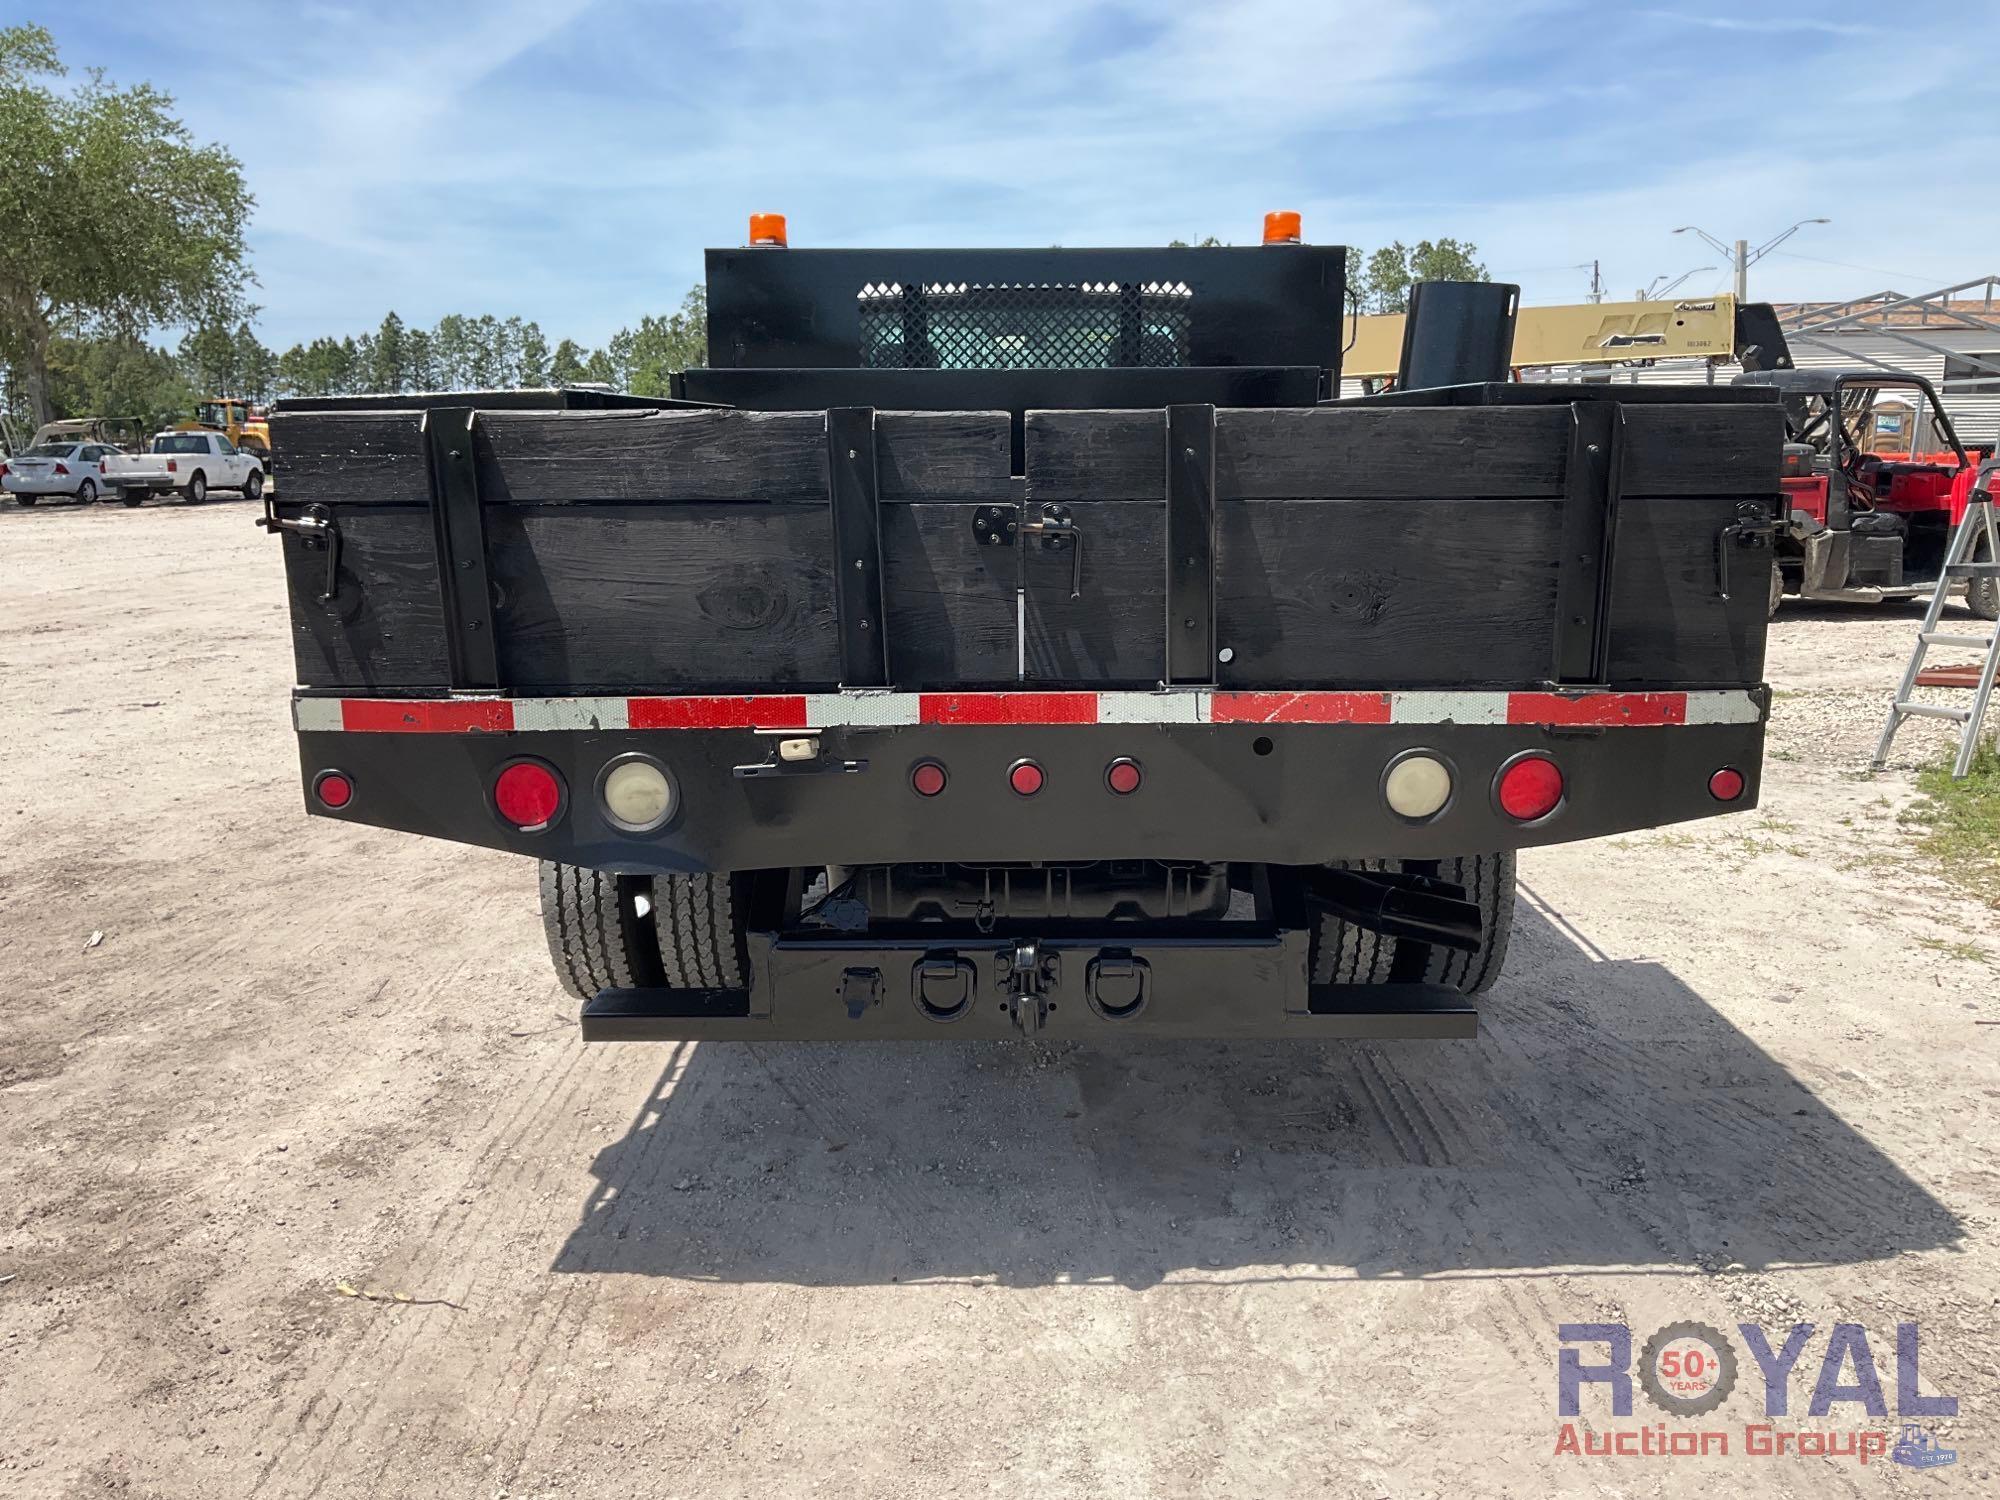 2017 Ford F450 Stakebody Flatbed Truck